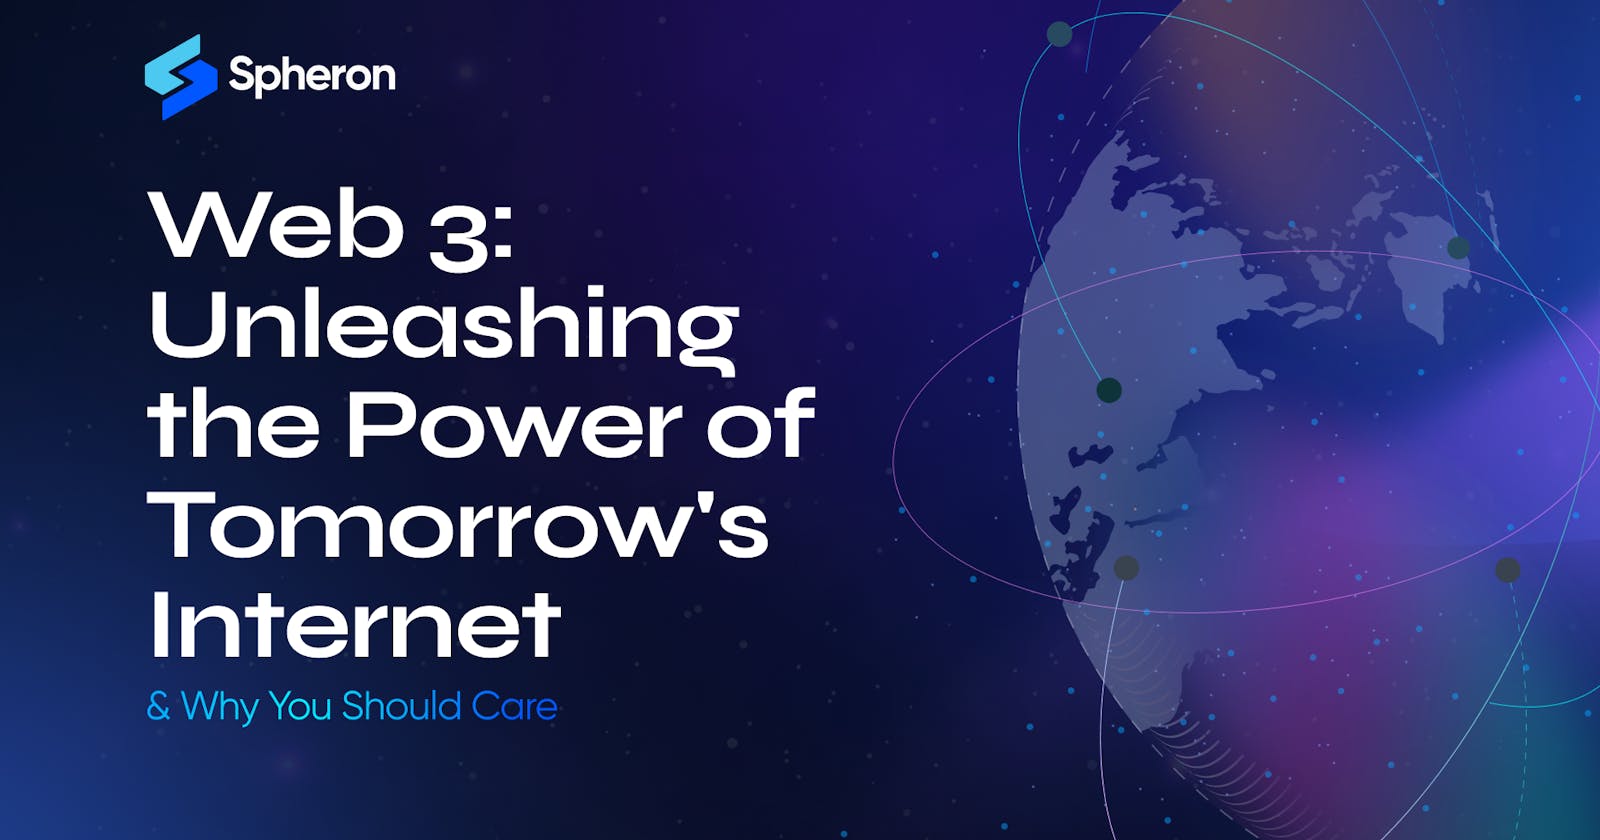 Web 3: Unleashing the Power of Tomorrow's Internet - Why It Matters